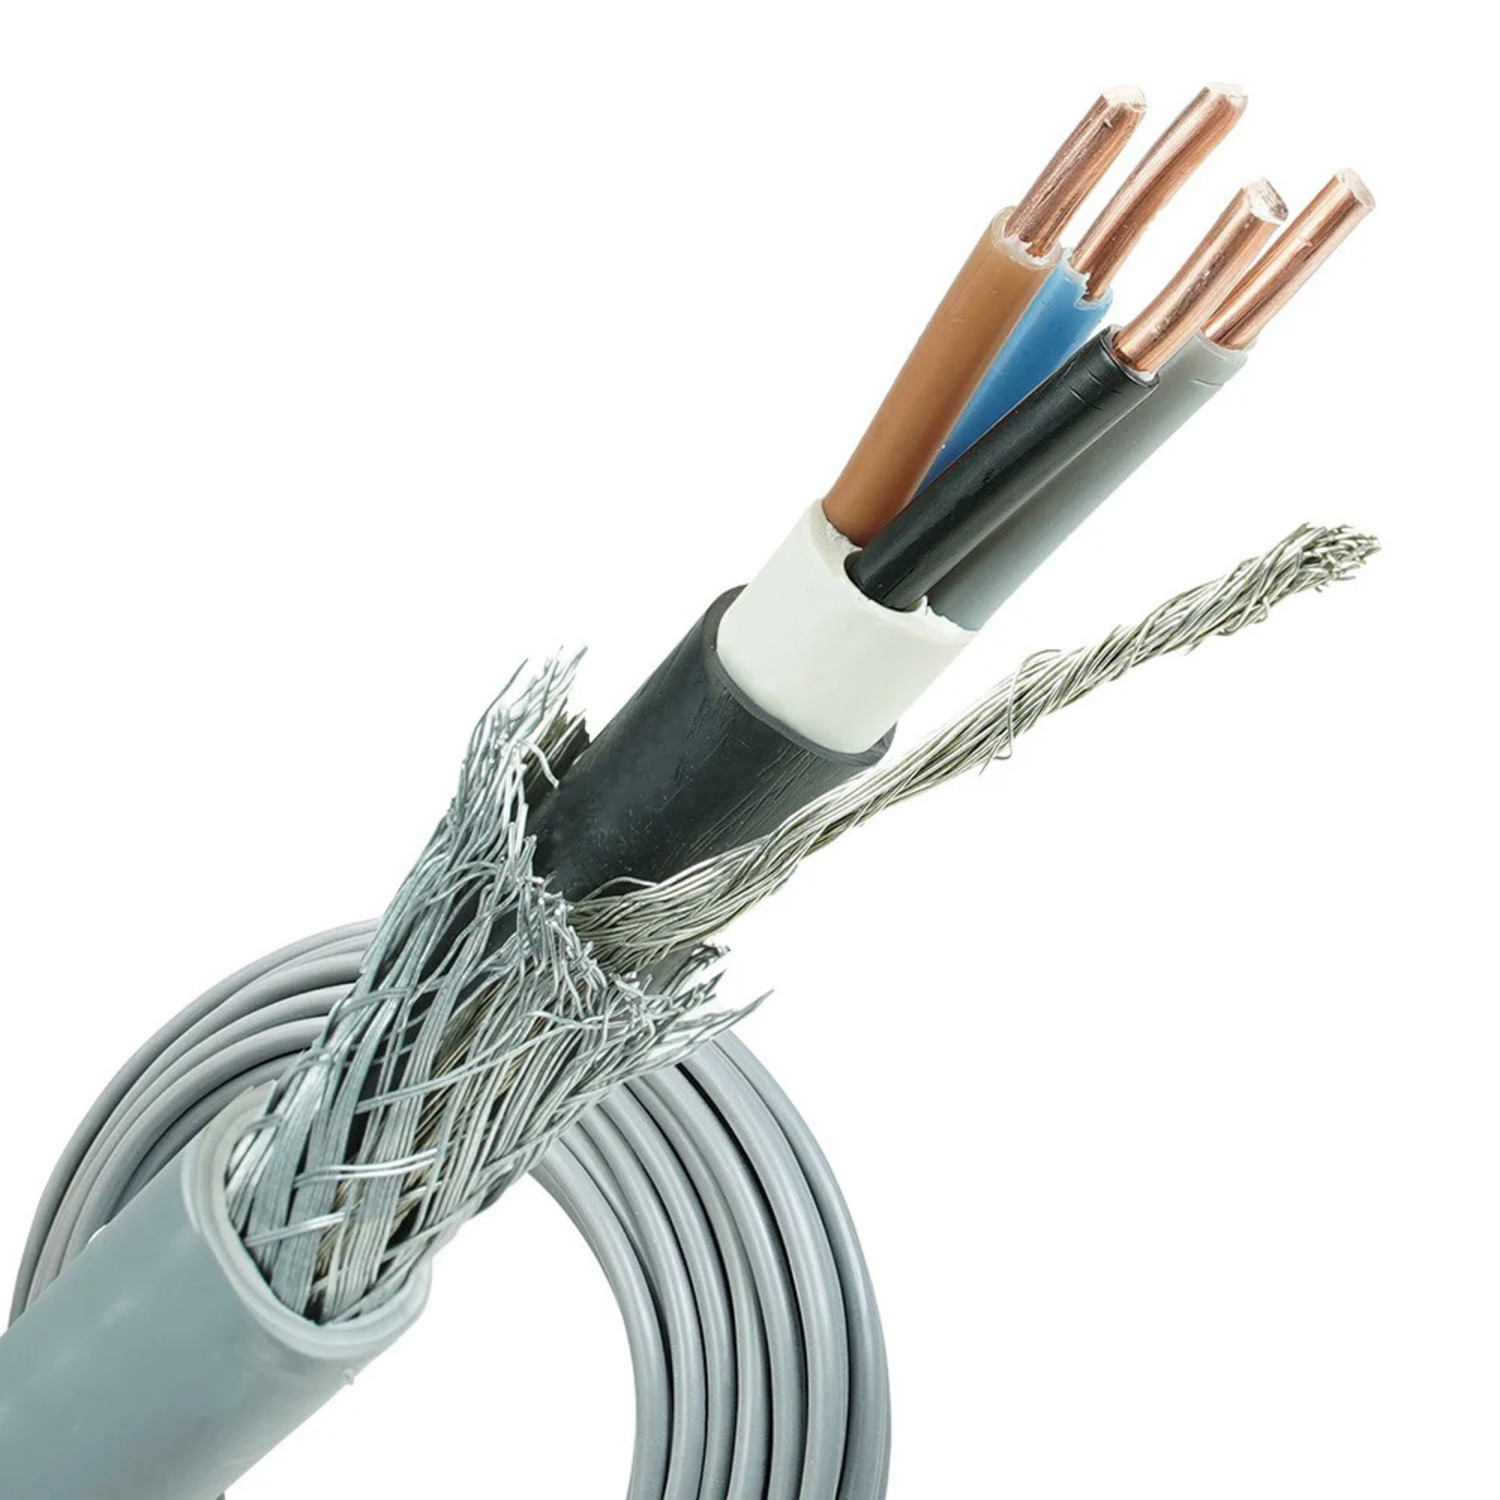 YMVK axis 4x6mm2 Ground cable per meter